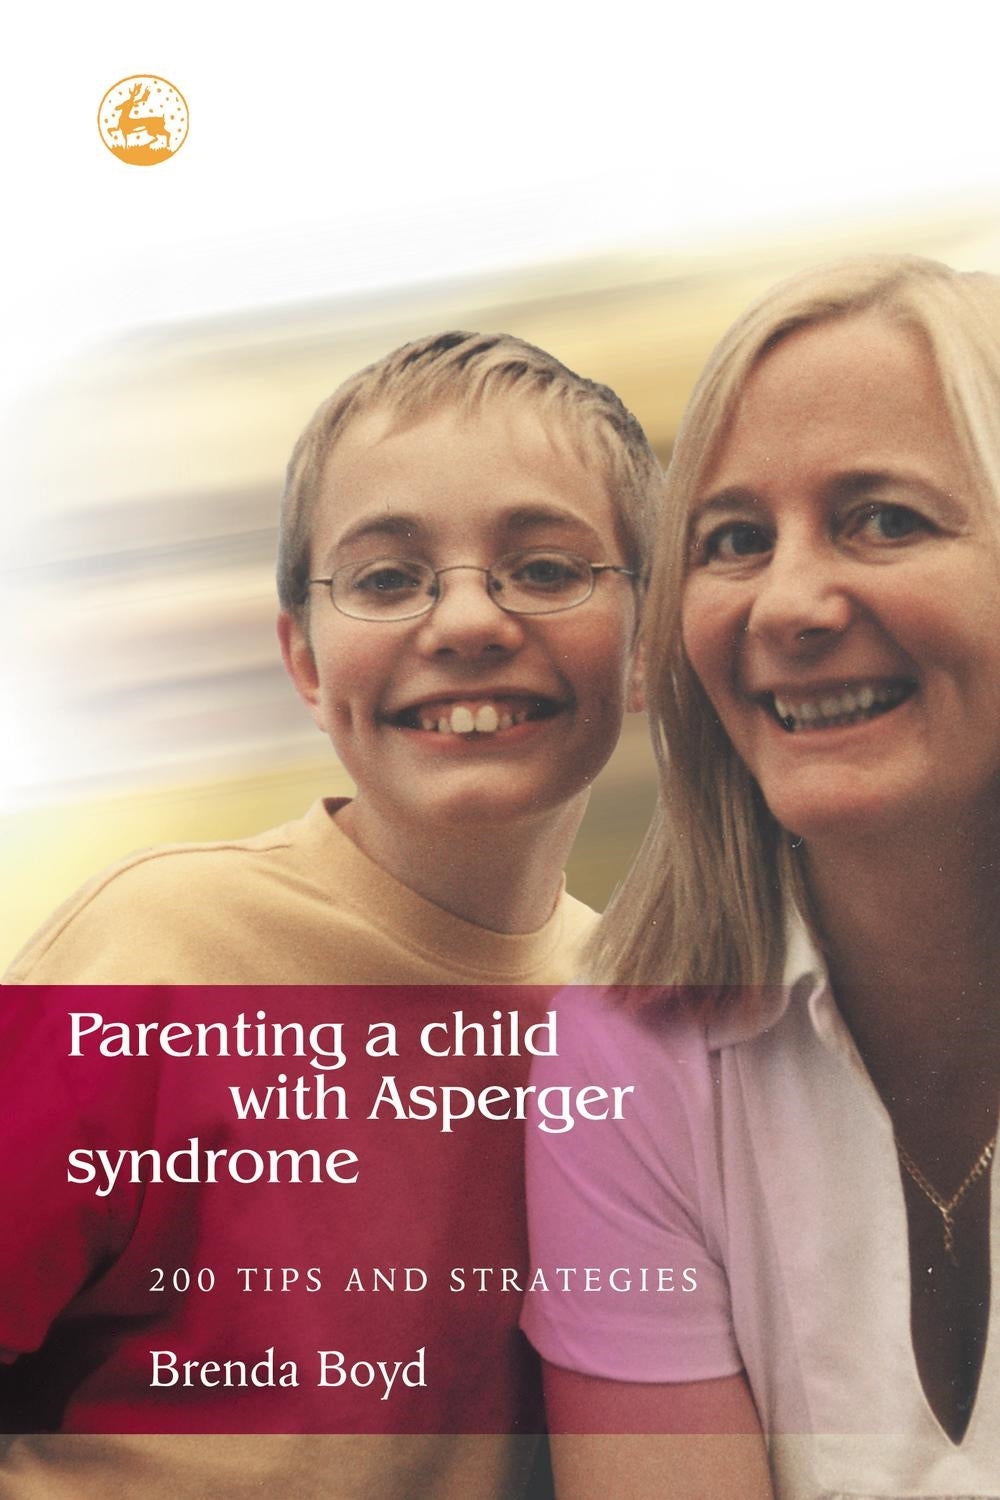 Parenting a Child with Asperger Syndrome by Brenda Boyd